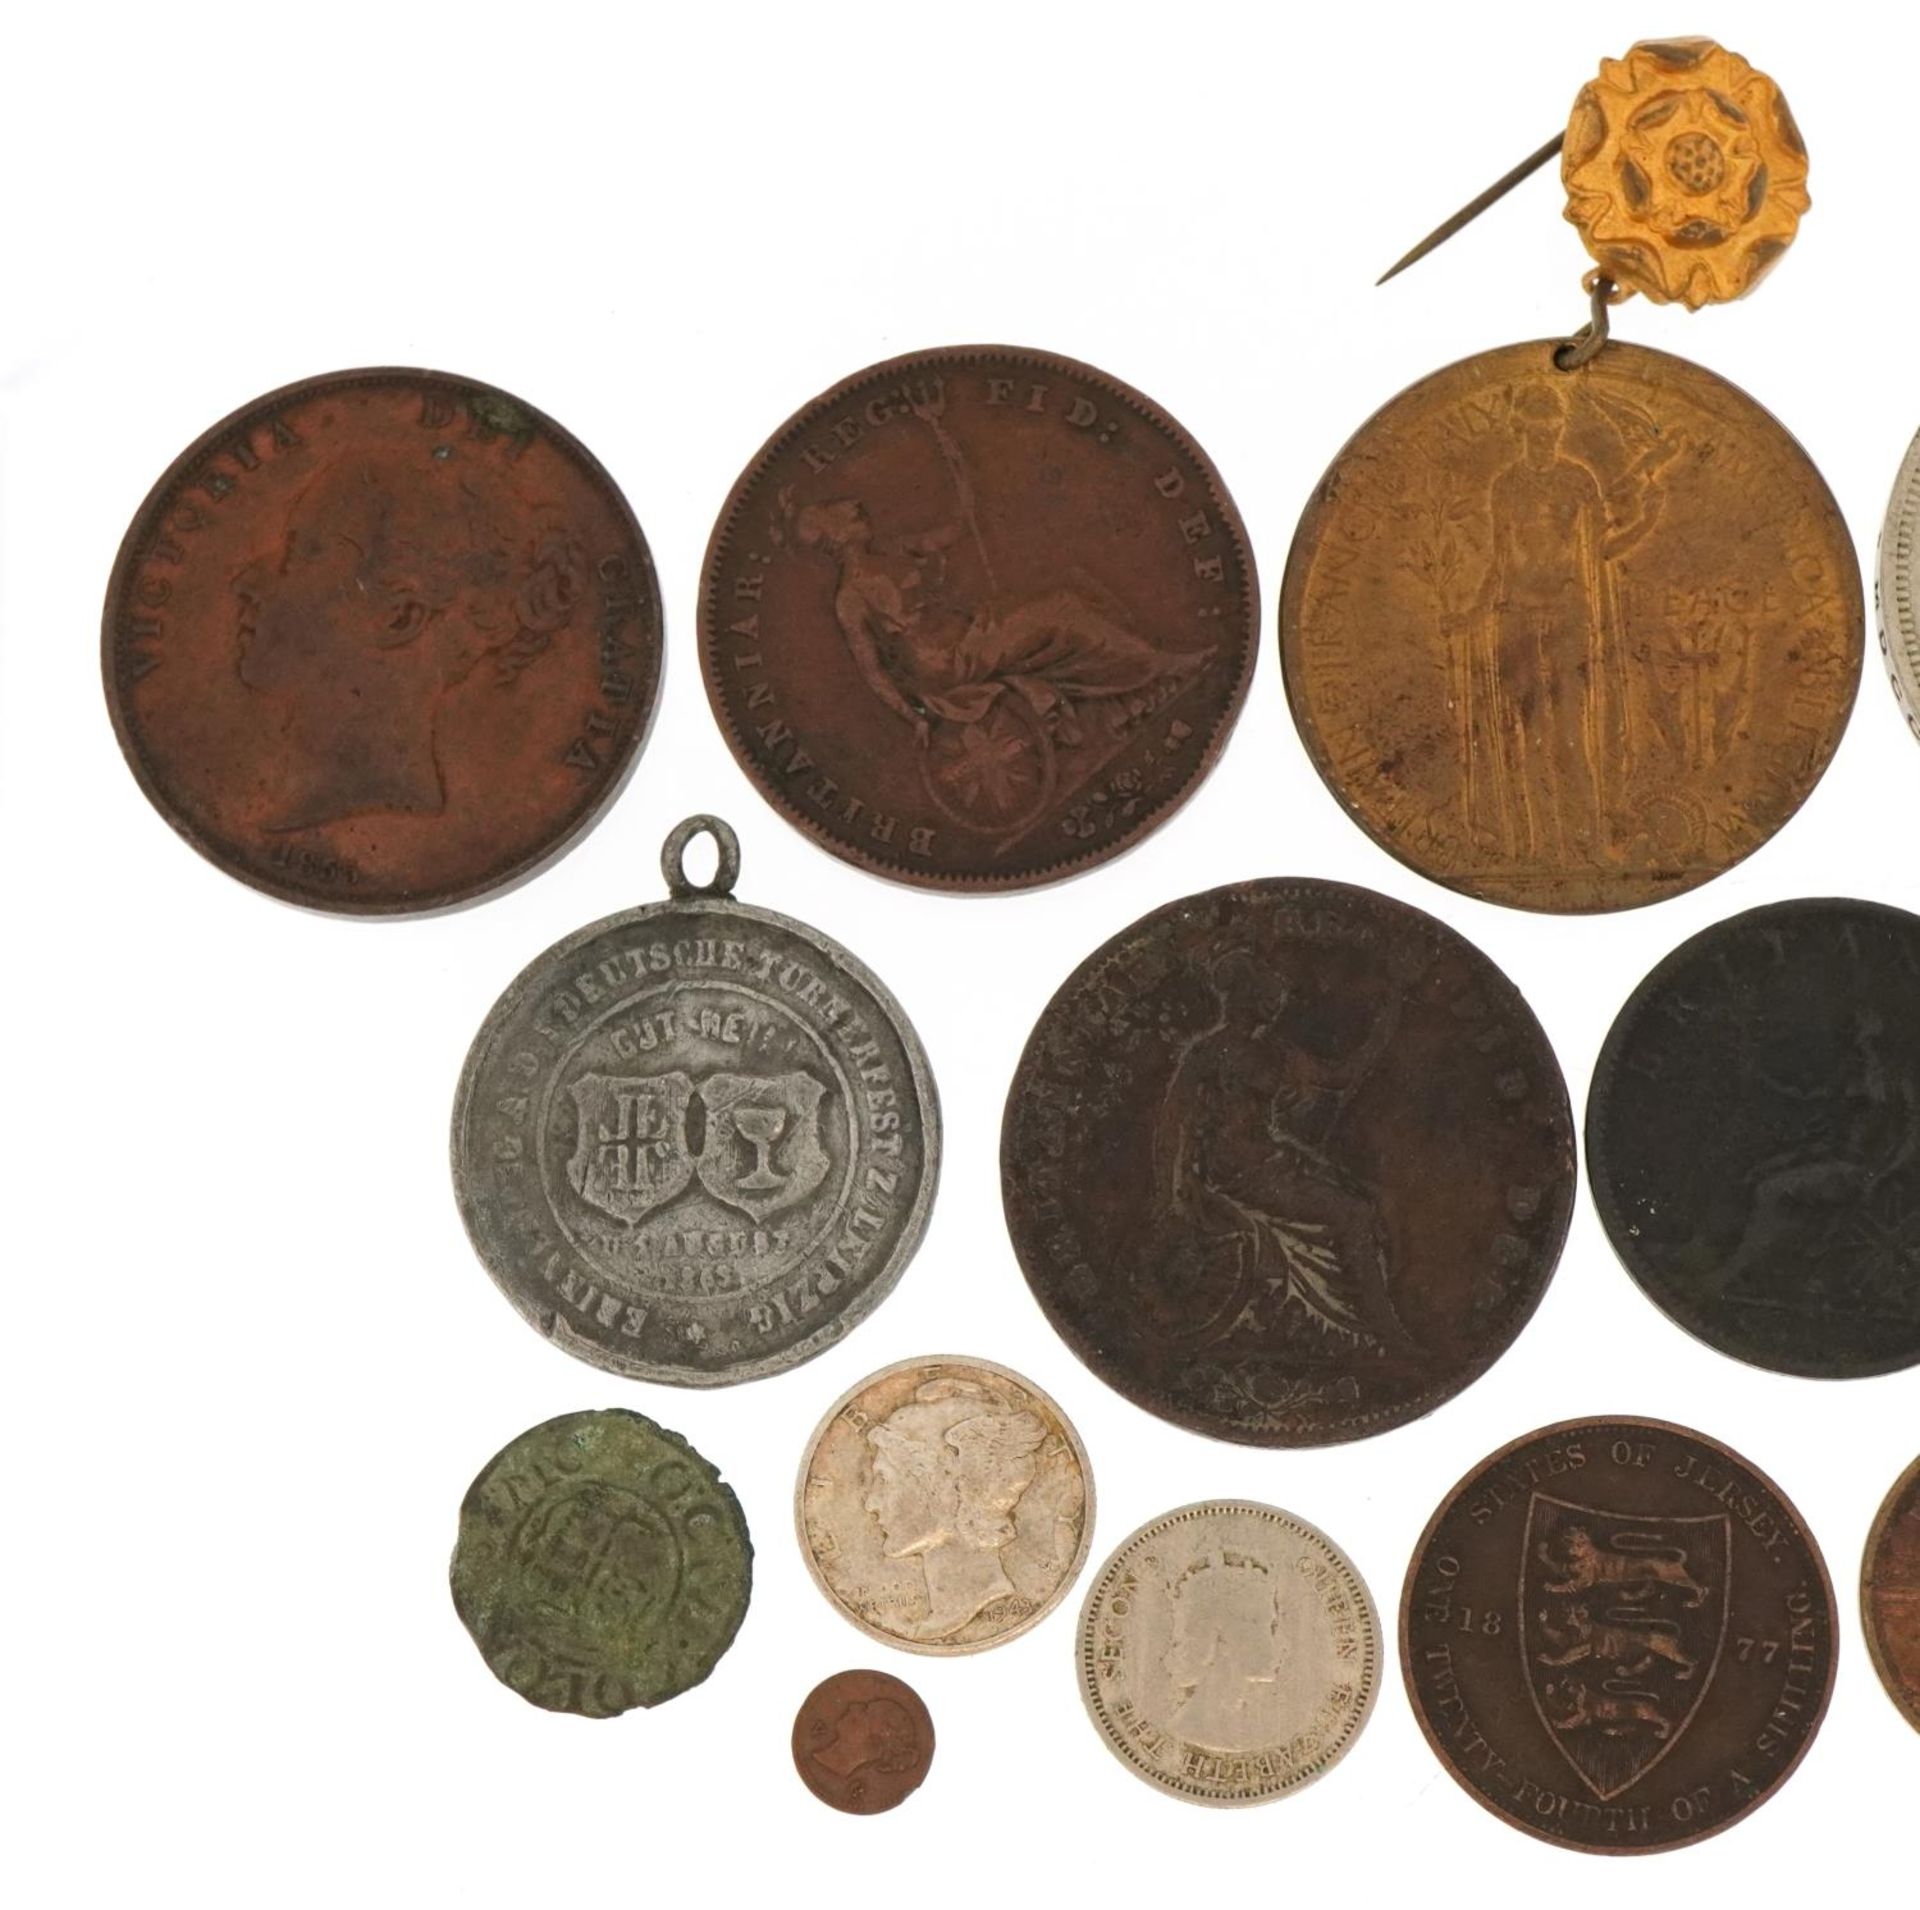 Early 19th century and later British and World coinage, medals and medallions including The - Image 2 of 3